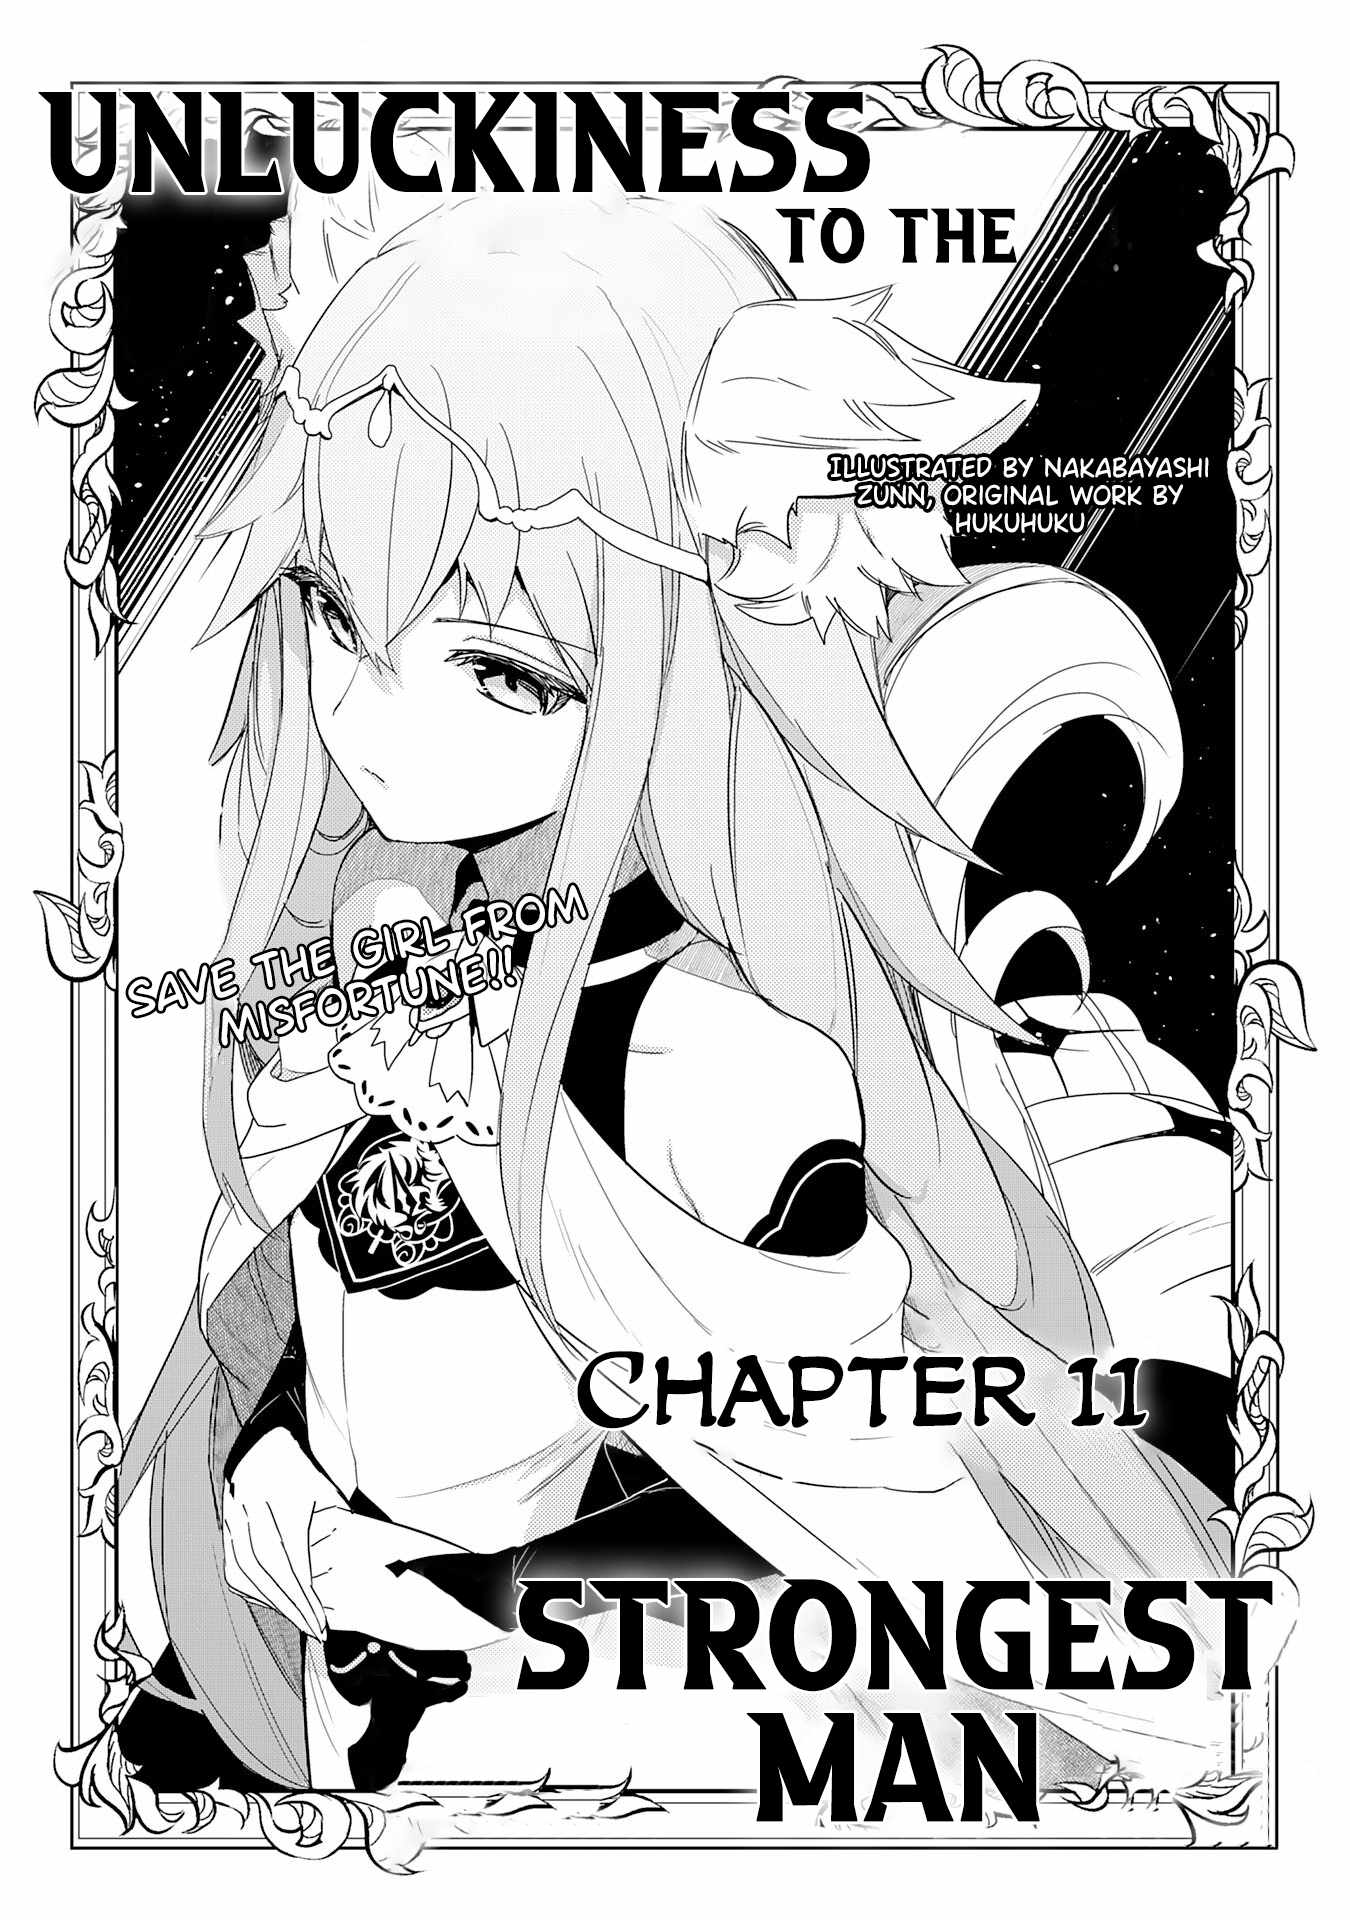 The Strongest Man, Born From Misfortune Chapter 11